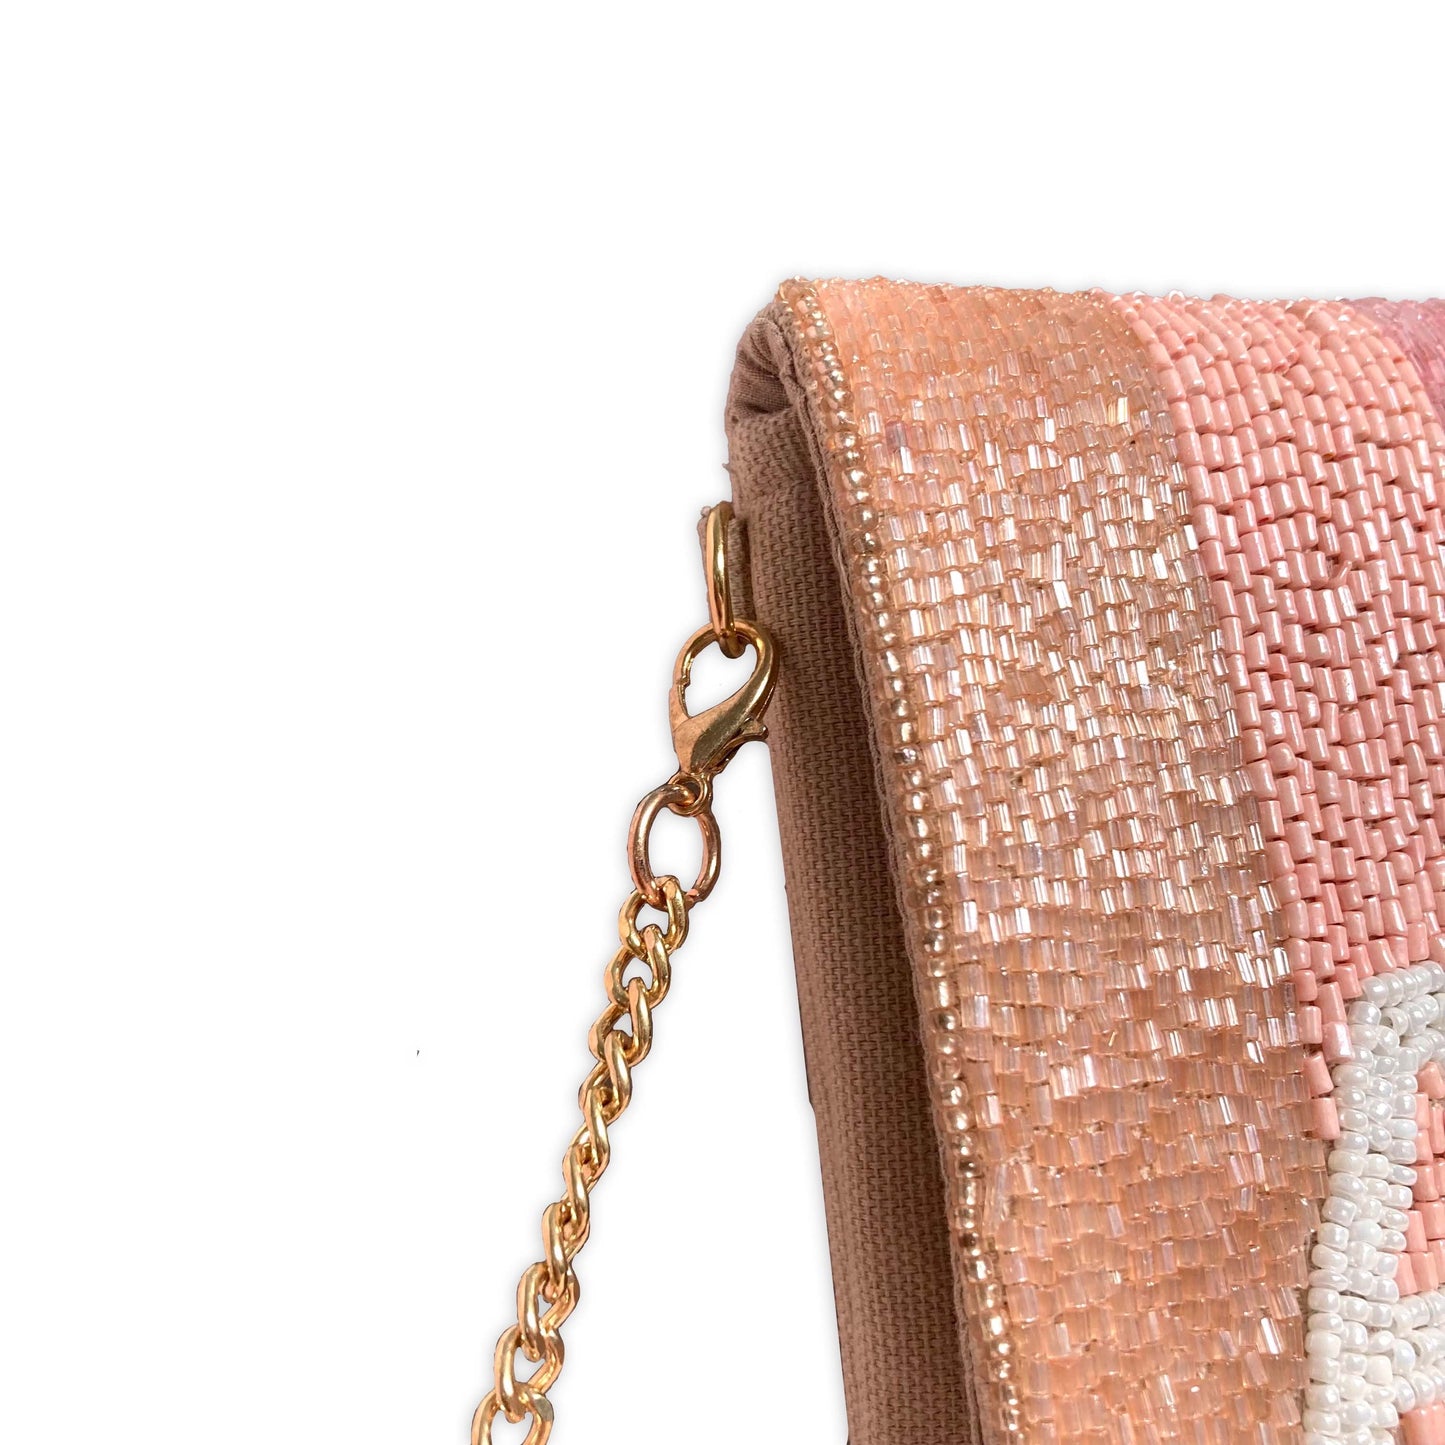 Beaded clutch bag with embellishments which is secured by a gold chain for cross-body wearing